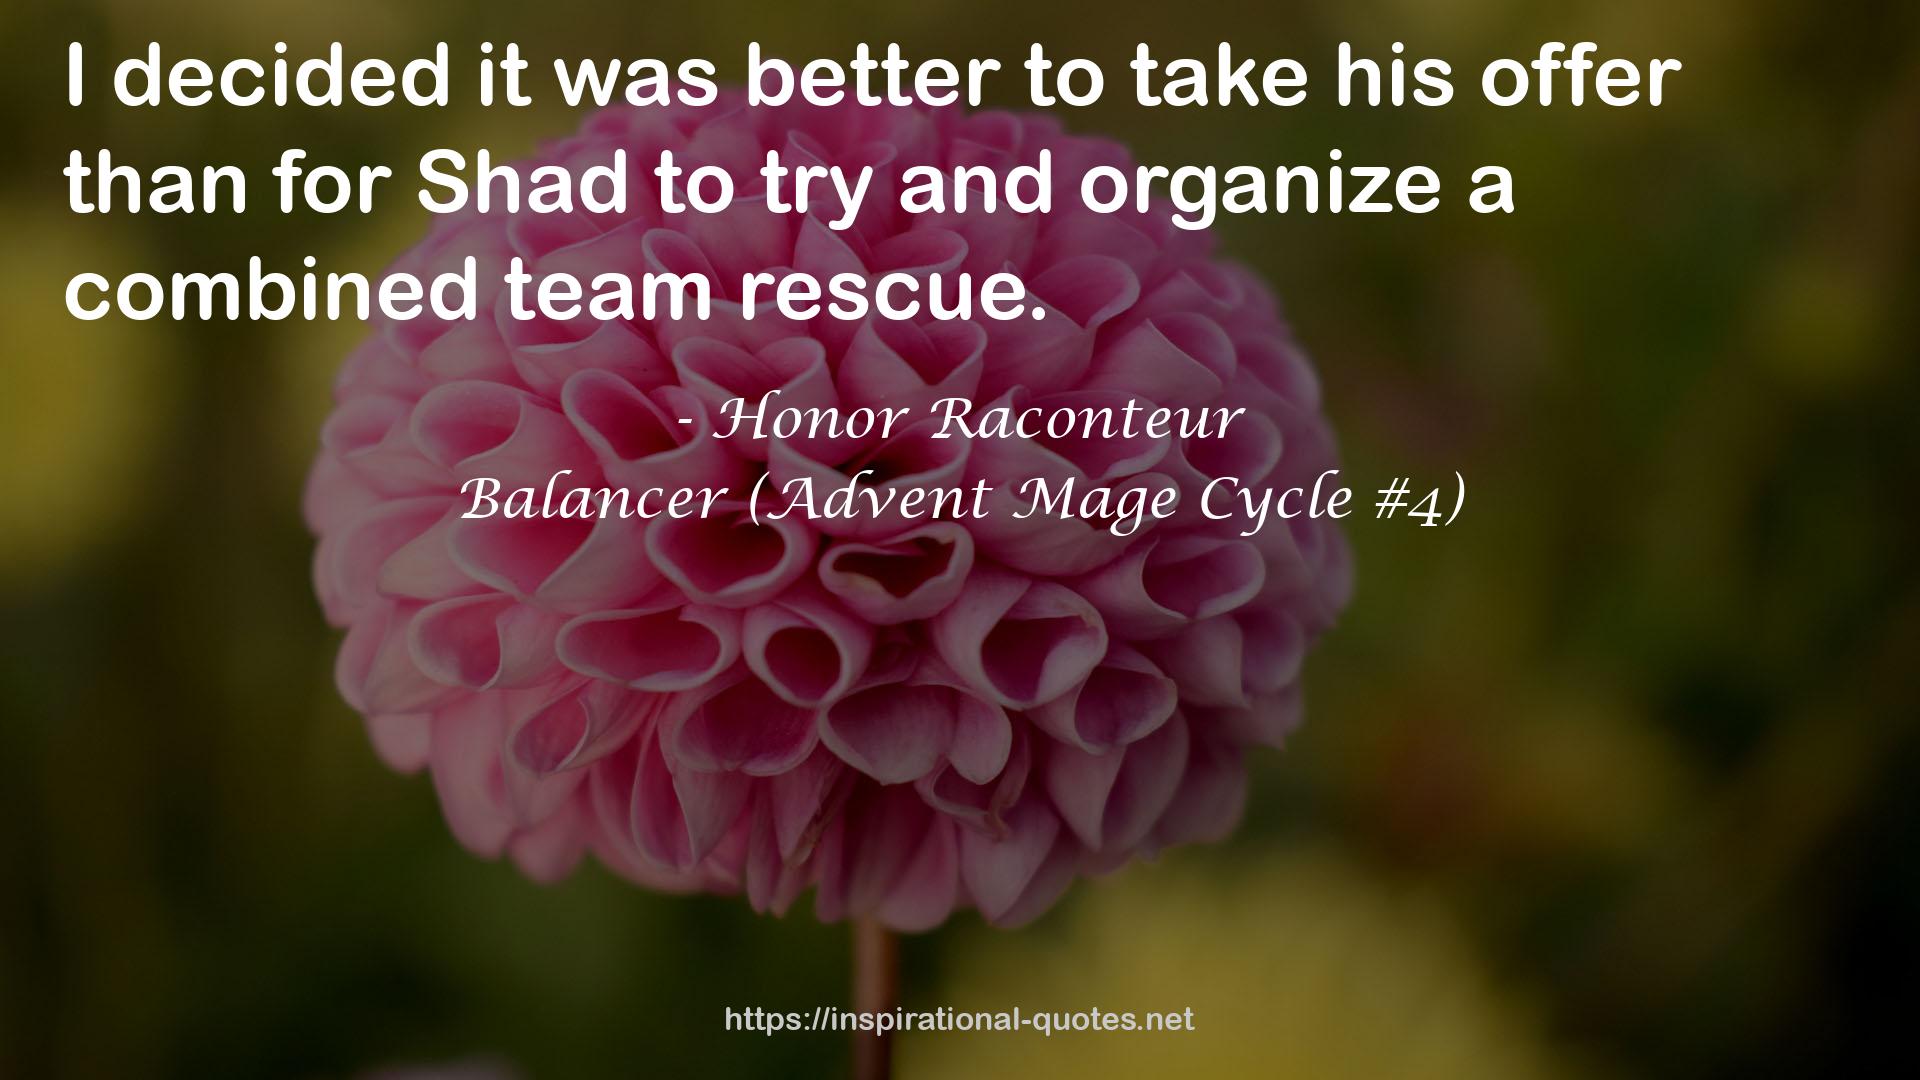 Balancer (Advent Mage Cycle #4) QUOTES